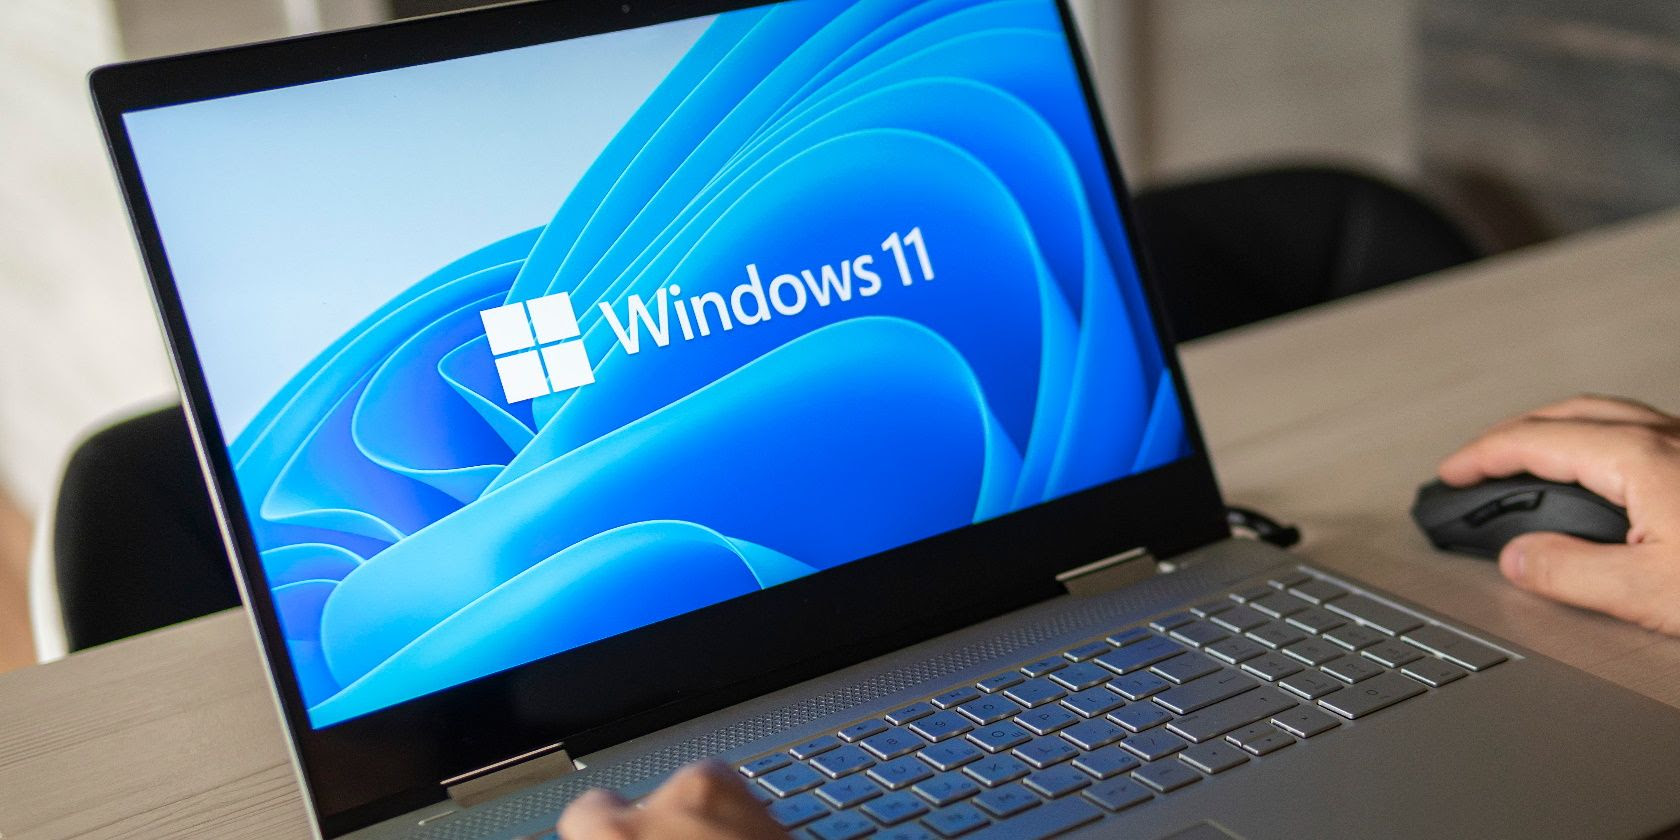 How to Buy and Download Windows 11 at the Best Price